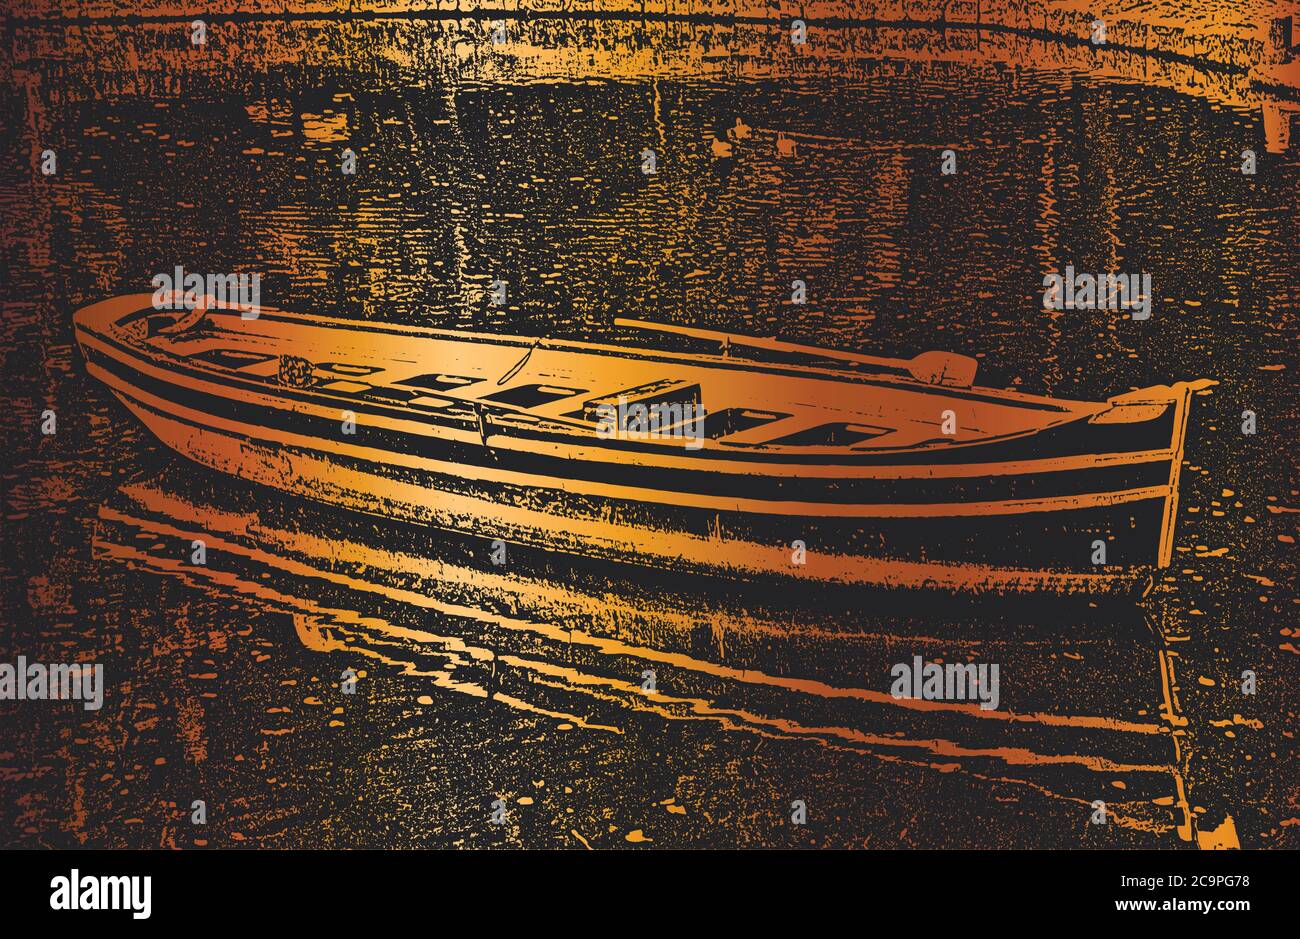 Old worn wooden boats on the river bank. Distressed vector Illustration. Black and golden background. Stock Vector